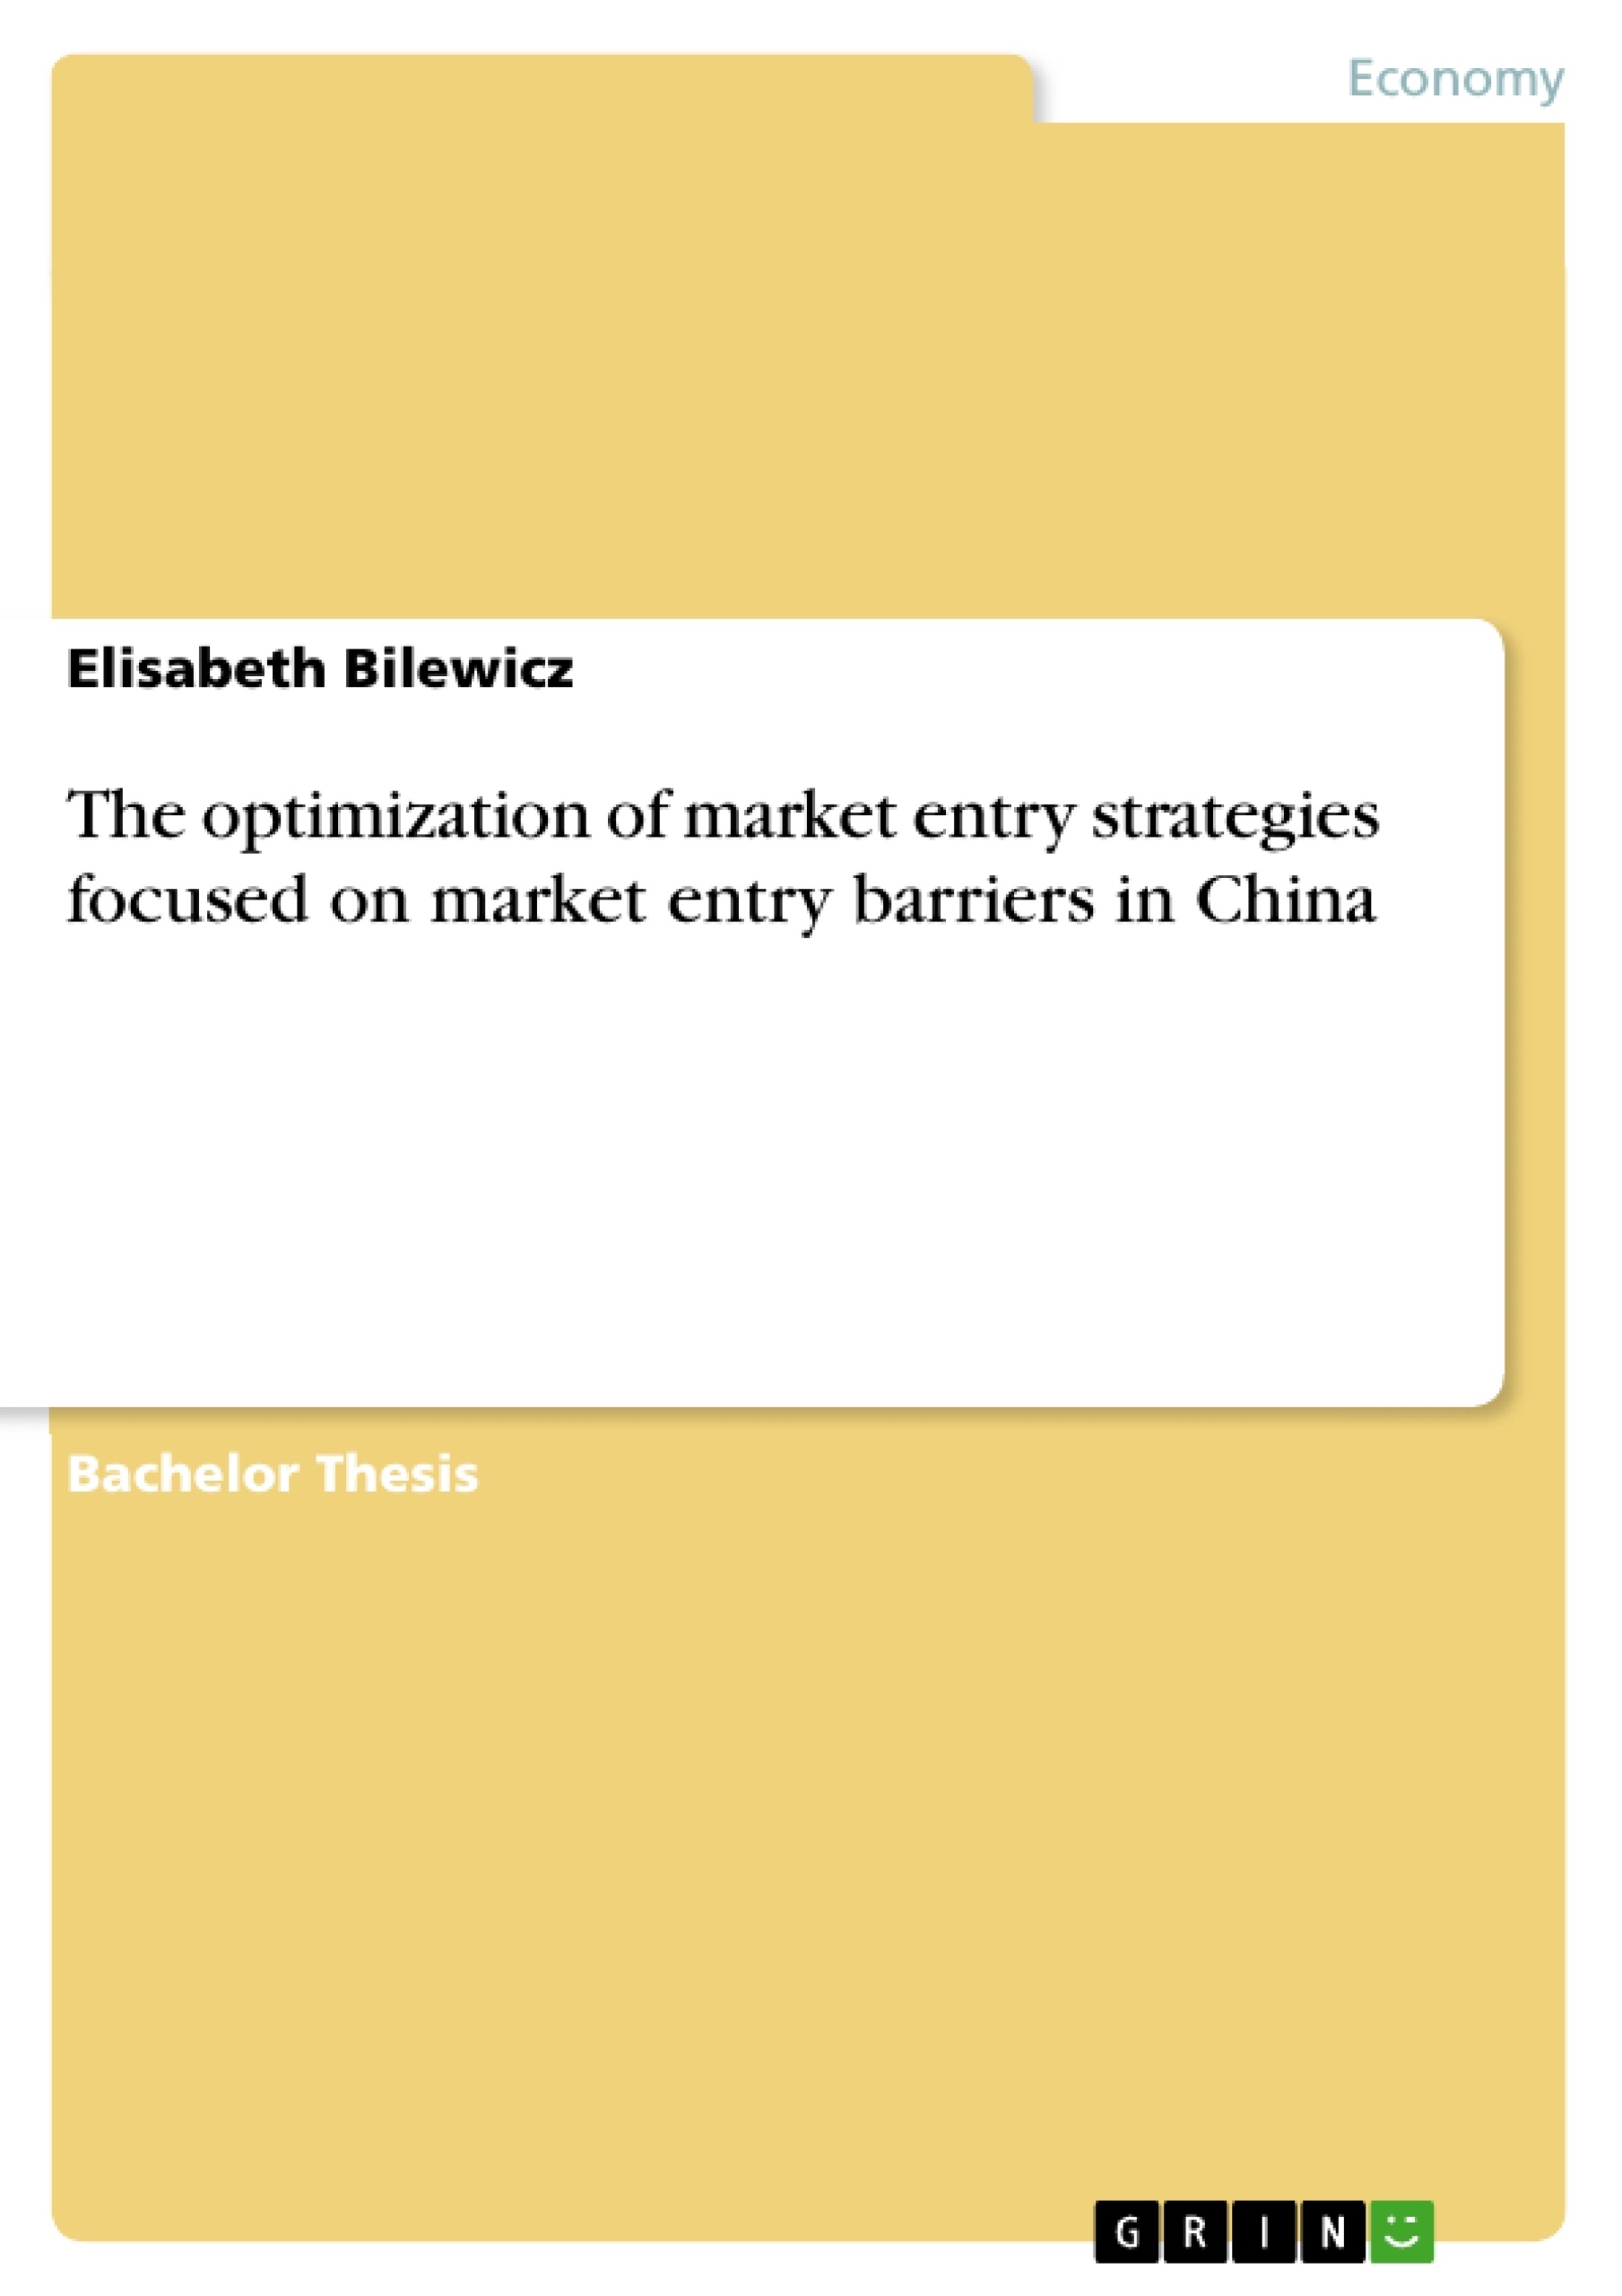 Título: The optimization of market entry strategies focused on market entry barriers in China